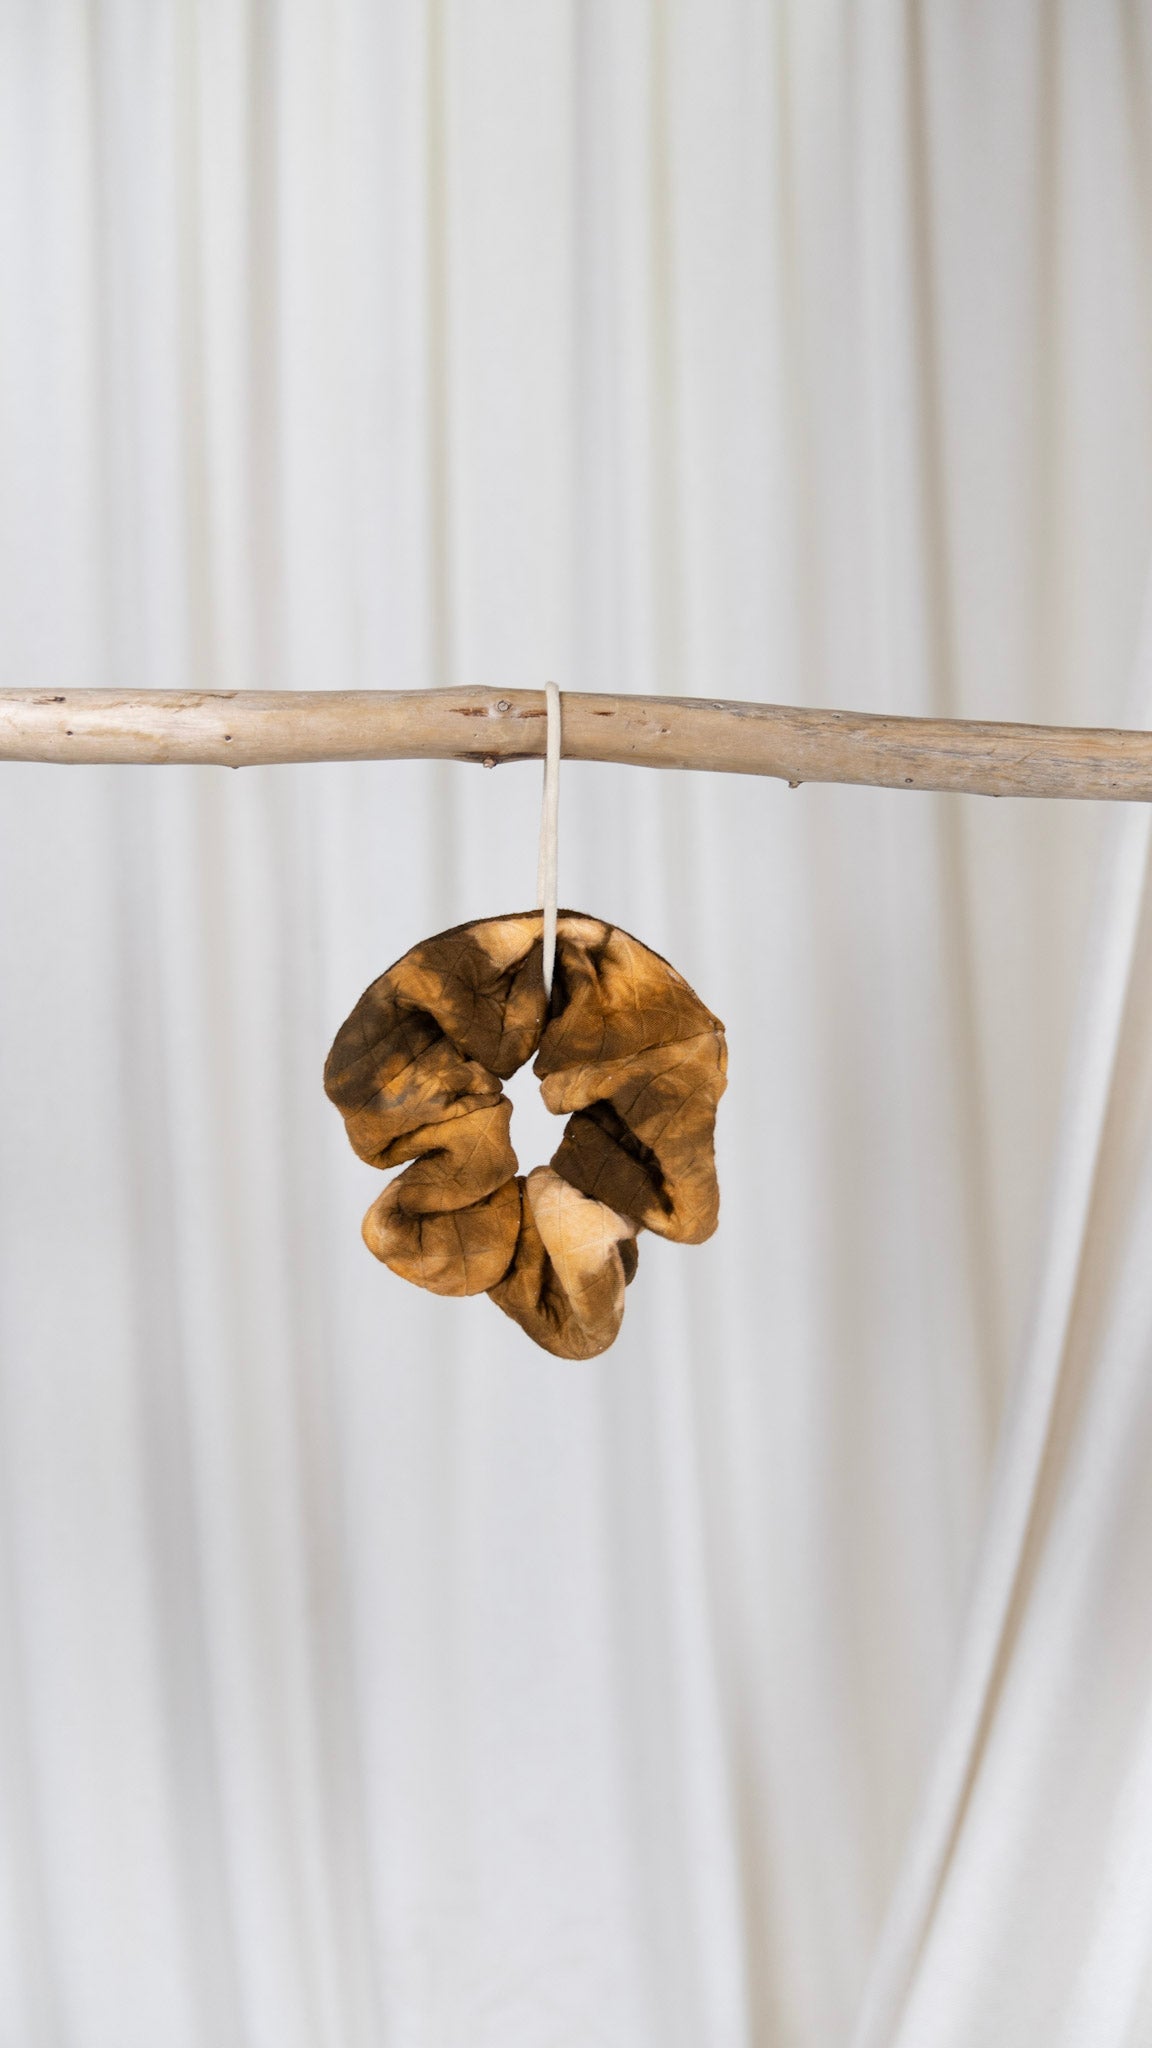 One orange and brown dyed oversized diamond quilted scrunchie hanging from a piece of driftwood